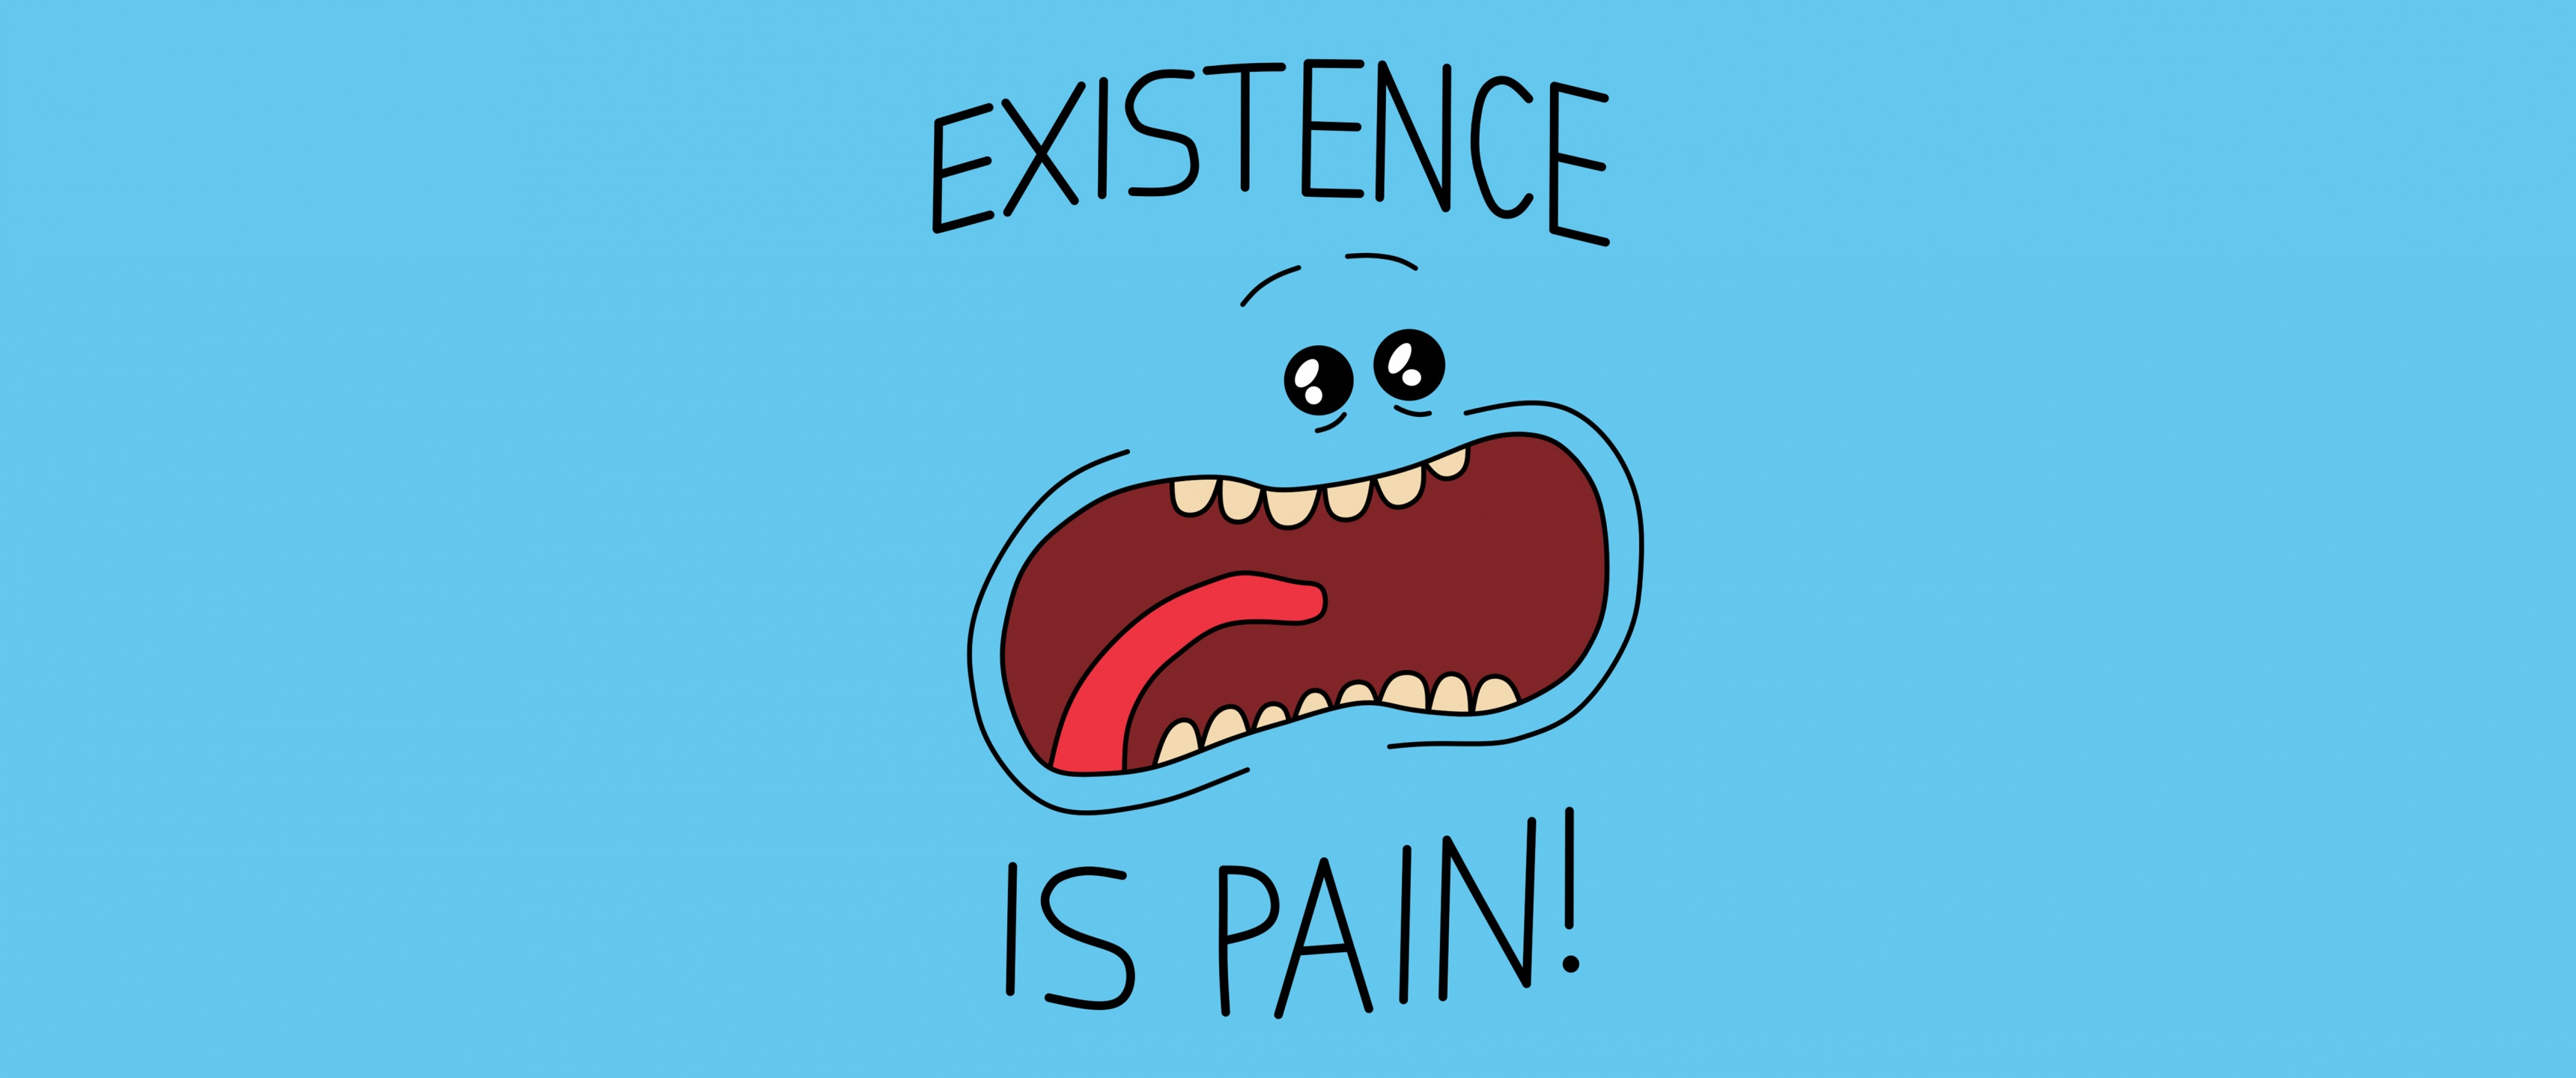 Mr. Meeseeks Wallpaper 4K, Existence is Pain, Rick and Morty